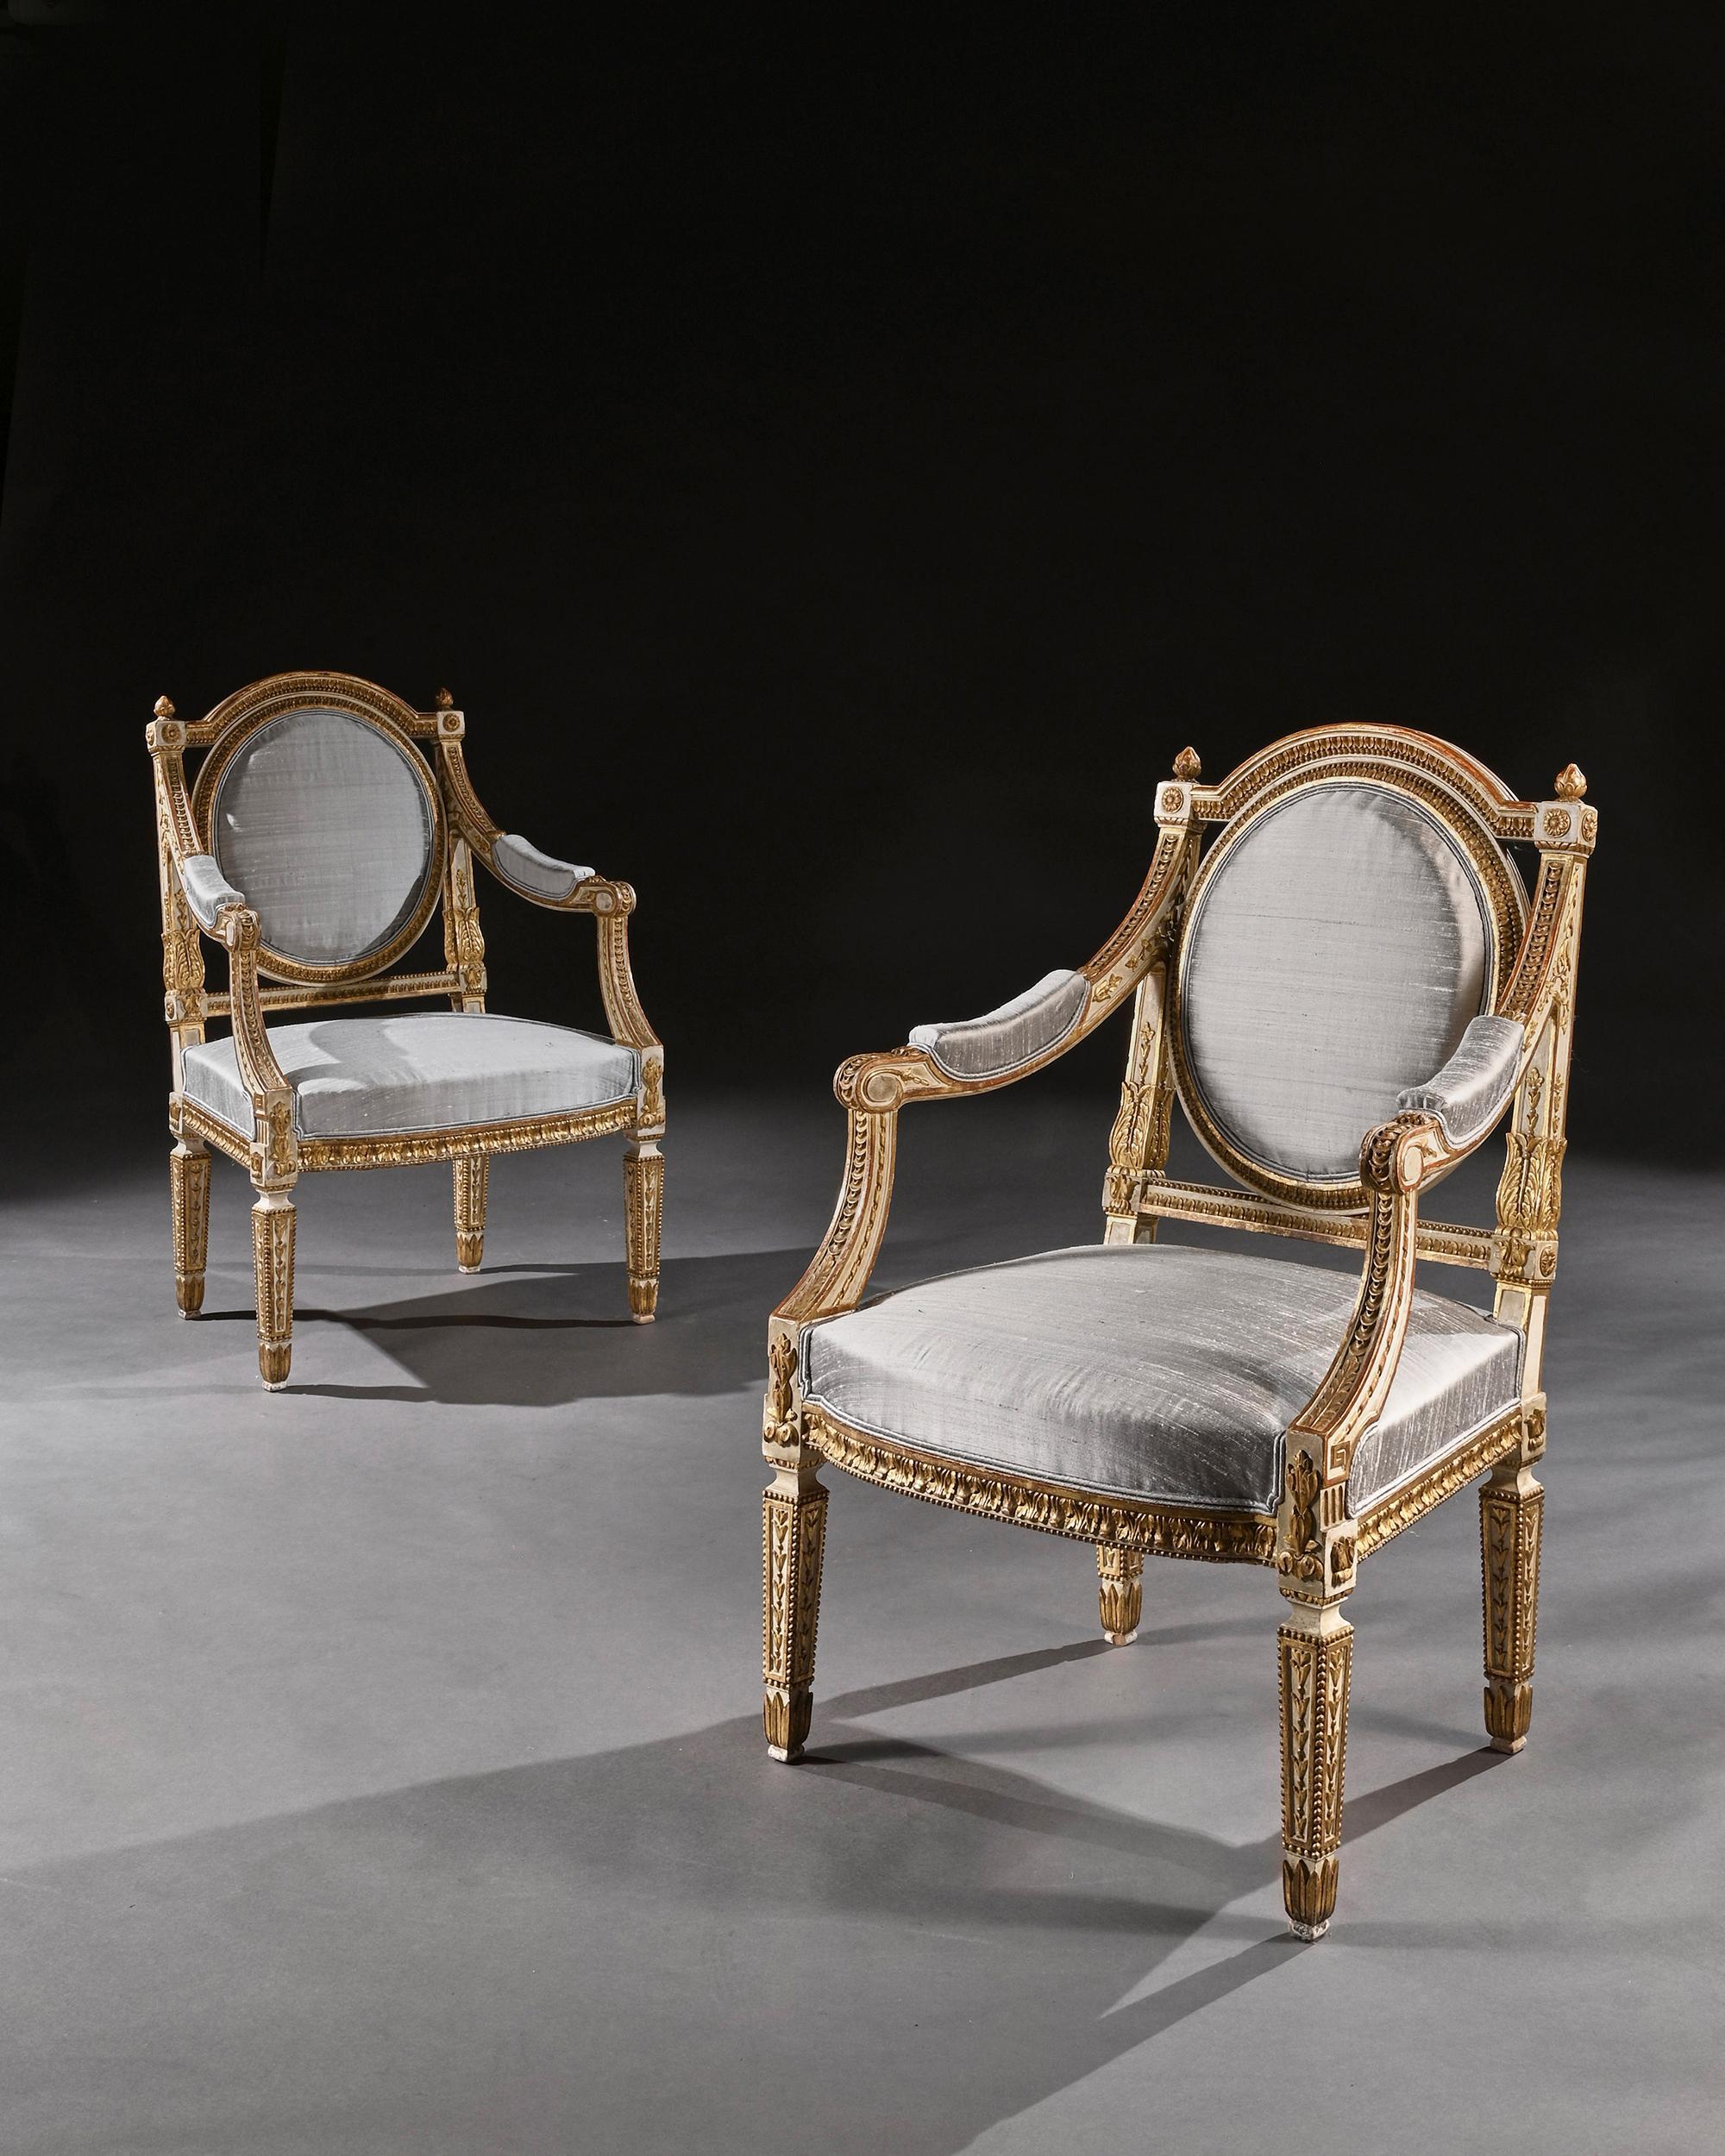 Extremely fine pair of decorative 19th century Italian painted and parcel gilt armchairs of neoclassical design,

Italian, late 19th century, circa 1880.

Oozing style these very attractive parcel gilt armchairs have husk and foliate-carved